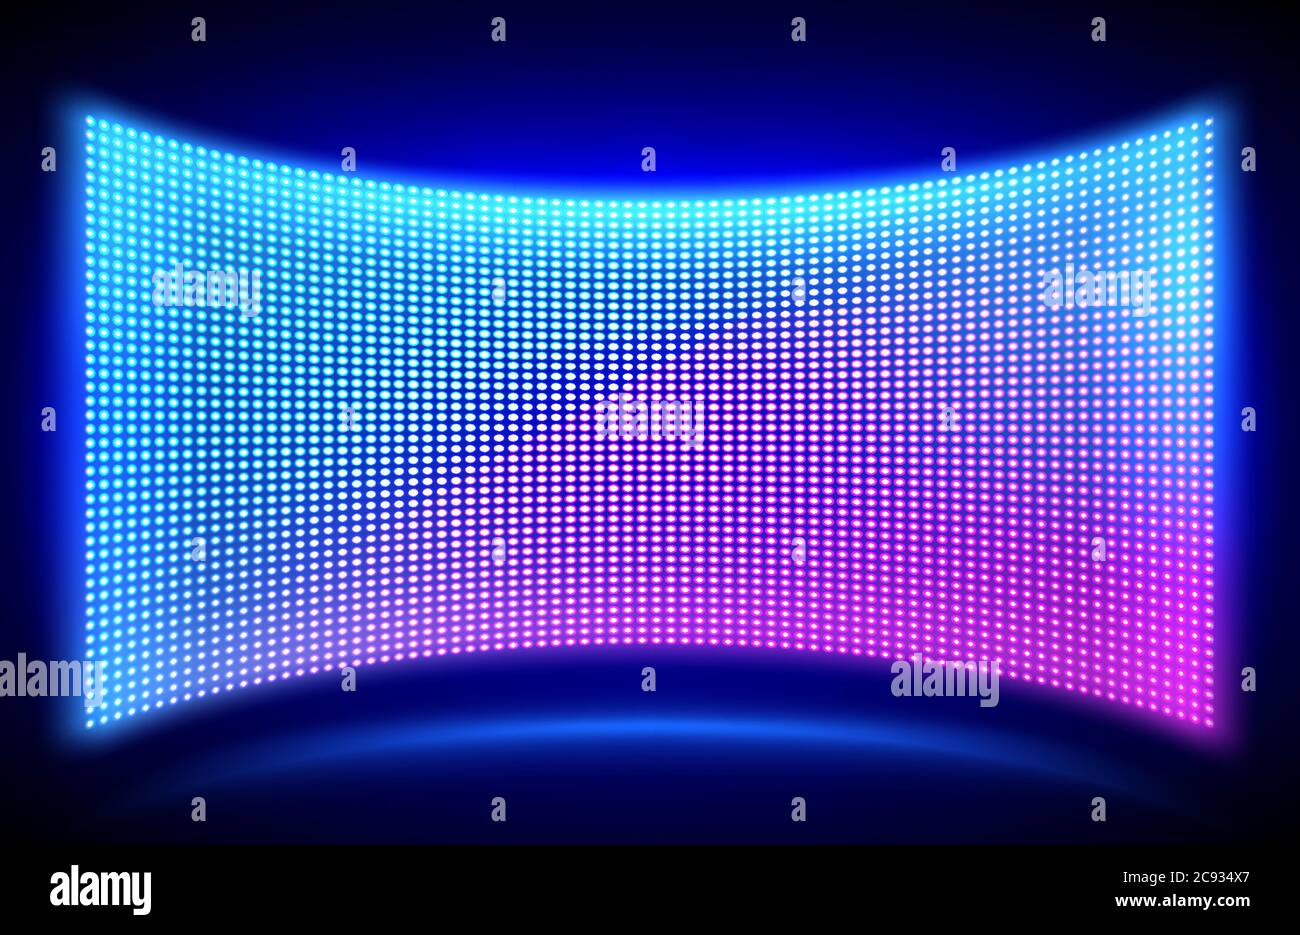 Led concave wall video screen with glowing blue and purple dot lights on  black background. Vector illustration of grid pattern for led display on  stadium or scene. Digital panel with mesh diode